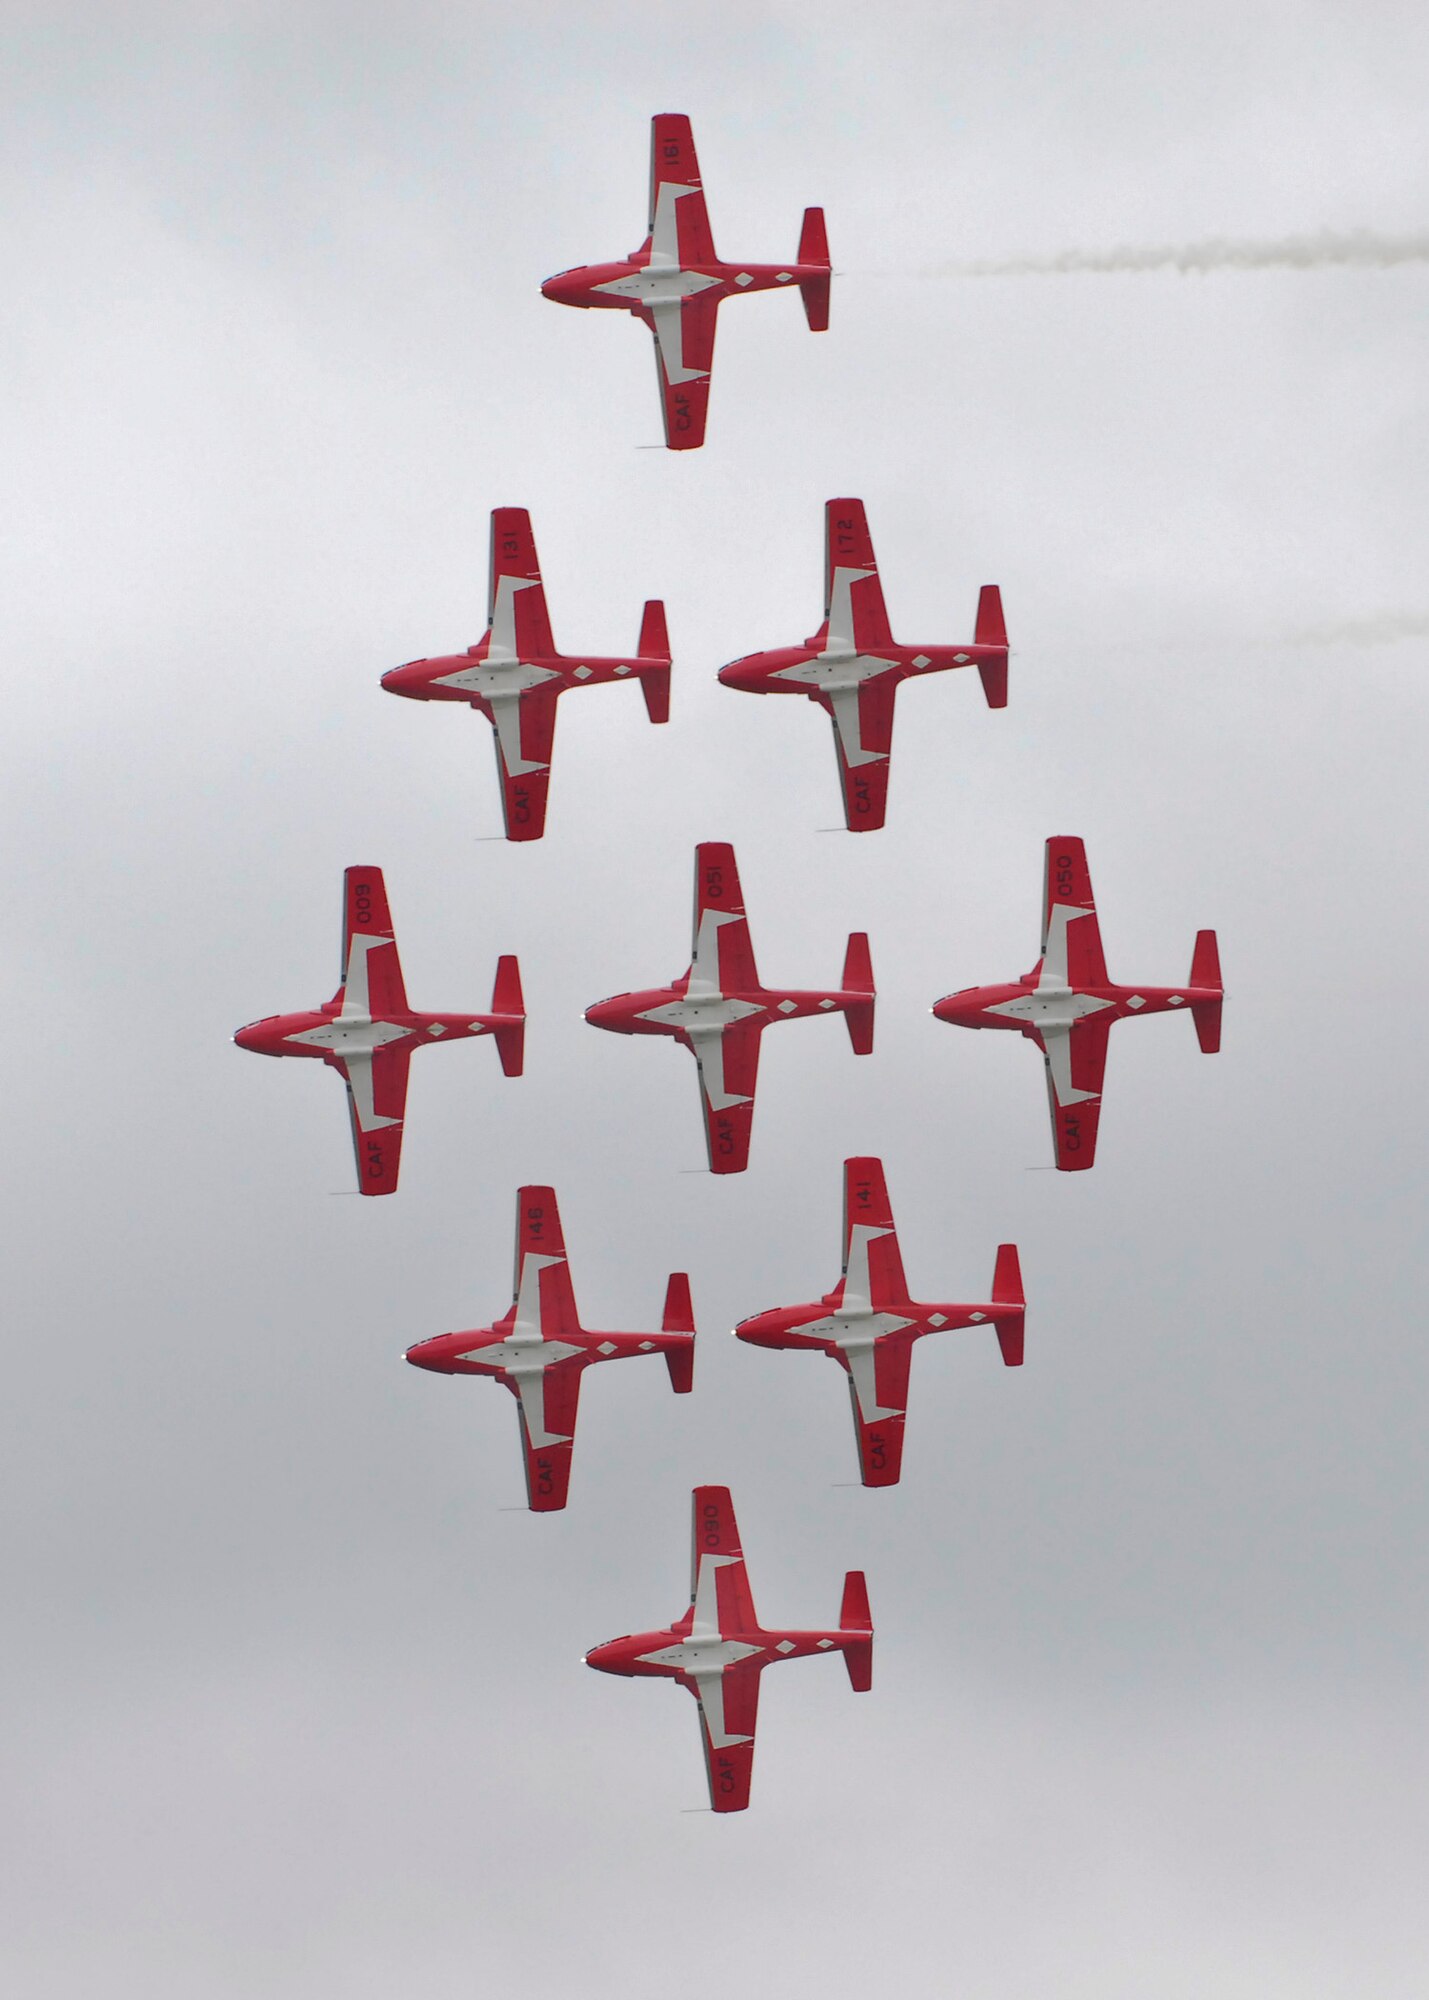 The Snowbirds perform at the 2009 Sheppard Open House and Air Show Oct. 10.
This year's air show Oct. 10-11 brought in about 16,000 visitors Saturday
and 7,000 visitors Sunday to Sheppard this weekend. 
